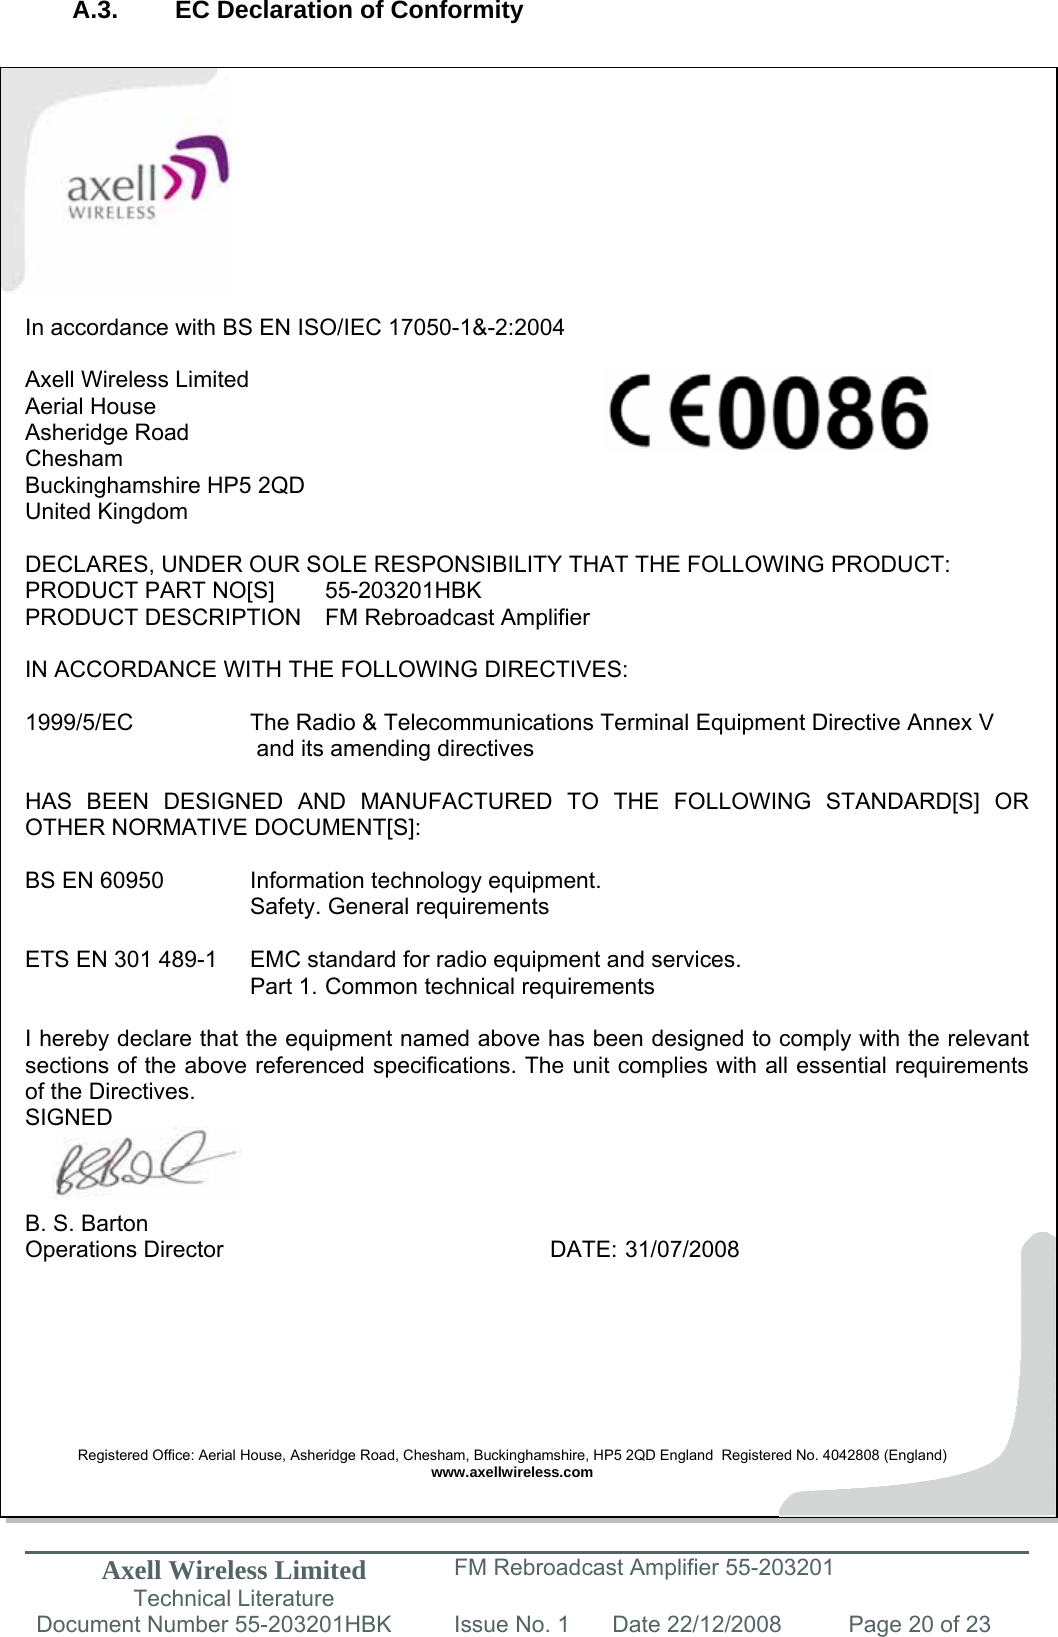 Axell Wireless Limited Technical Literature FM Rebroadcast Amplifier 55-203201 Document Number 55-203201HBK Issue No. 1  Date 22/12/2008  Page 20 of 23   A.3.  EC Declaration of Conformity            In accordance with BS EN ISO/IEC 17050-1&amp;-2:2004  Axell Wireless Limited Aerial House Asheridge Road Chesham Buckinghamshire HP5 2QD United Kingdom  DECLARES, UNDER OUR SOLE RESPONSIBILITY THAT THE FOLLOWING PRODUCT: PRODUCT PART NO[S]  55-203201HBK PRODUCT DESCRIPTION  FM Rebroadcast Amplifier  IN ACCORDANCE WITH THE FOLLOWING DIRECTIVES:  1999/5/EC    The Radio &amp; Telecommunications Terminal Equipment Directive Annex V        and its amending directives  HAS BEEN DESIGNED AND MANUFACTURED TO THE FOLLOWING STANDARD[S] OR OTHER NORMATIVE DOCUMENT[S]:  BS EN 60950    Information technology equipment.     Safety. General requirements   ETS EN 301 489-1  EMC standard for radio equipment and services.        Part 1.  Common technical requirements  I hereby declare that the equipment named above has been designed to comply with the relevant sections of the above referenced specifications. The unit complies with all essential requirements of the Directives. SIGNED    B. S. Barton Operations Director     DATE: 31/07/2008        Registered Office: Aerial House, Asheridge Road, Chesham, Buckinghamshire, HP5 2QD England  Registered No. 4042808 (England) www.axellwireless.com   